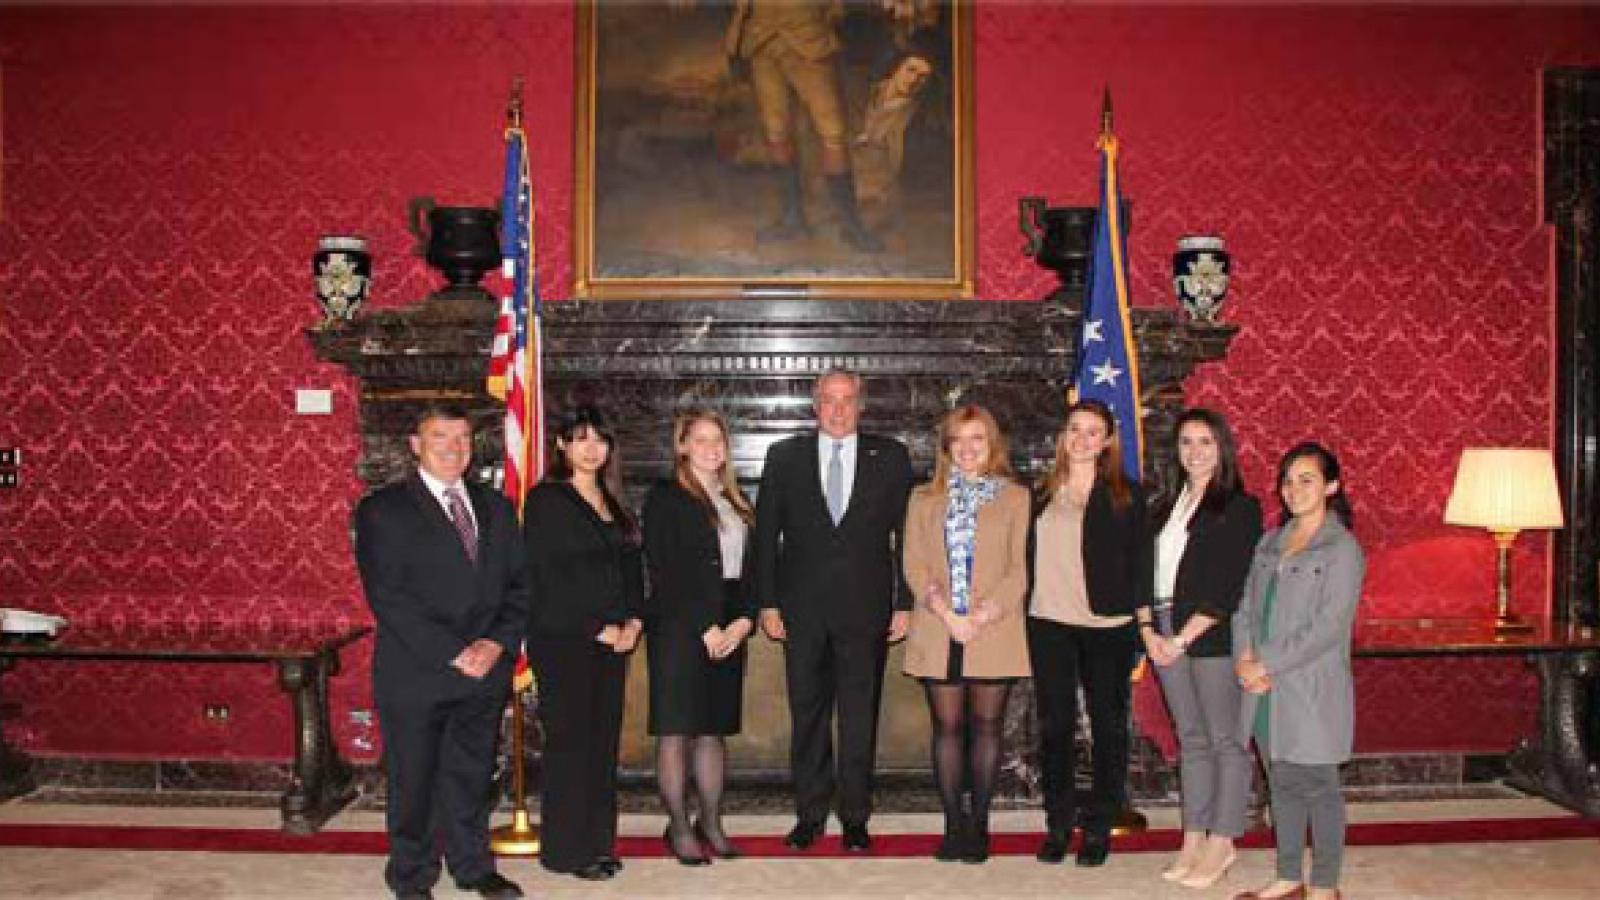 Kaitlin Cutshaw poses for photo with the U.S. Ambassador, staff and interns at the U.S. Embassy in Rome.